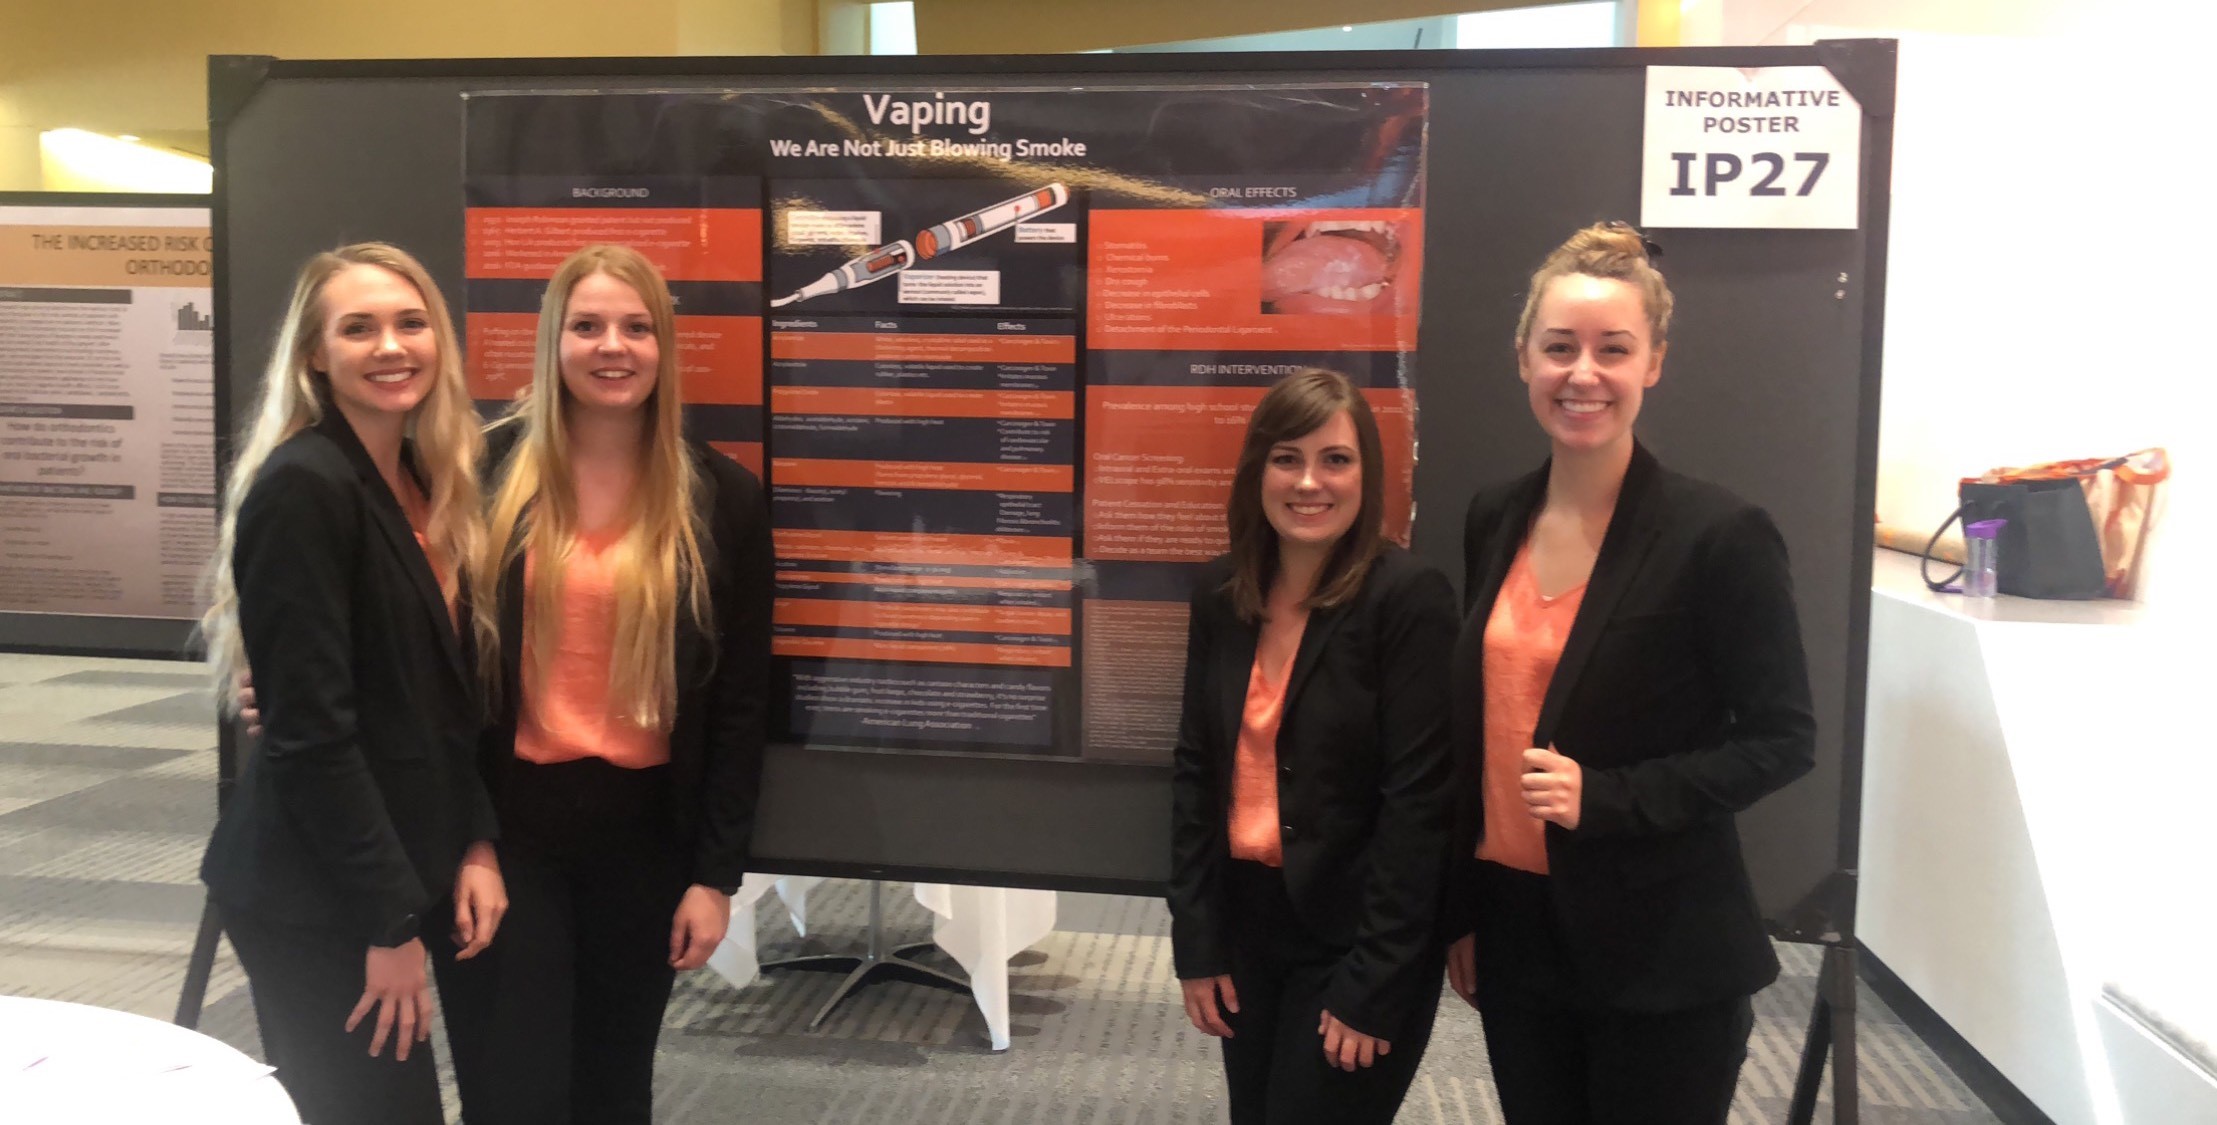 Students pose with a research poster about vaping